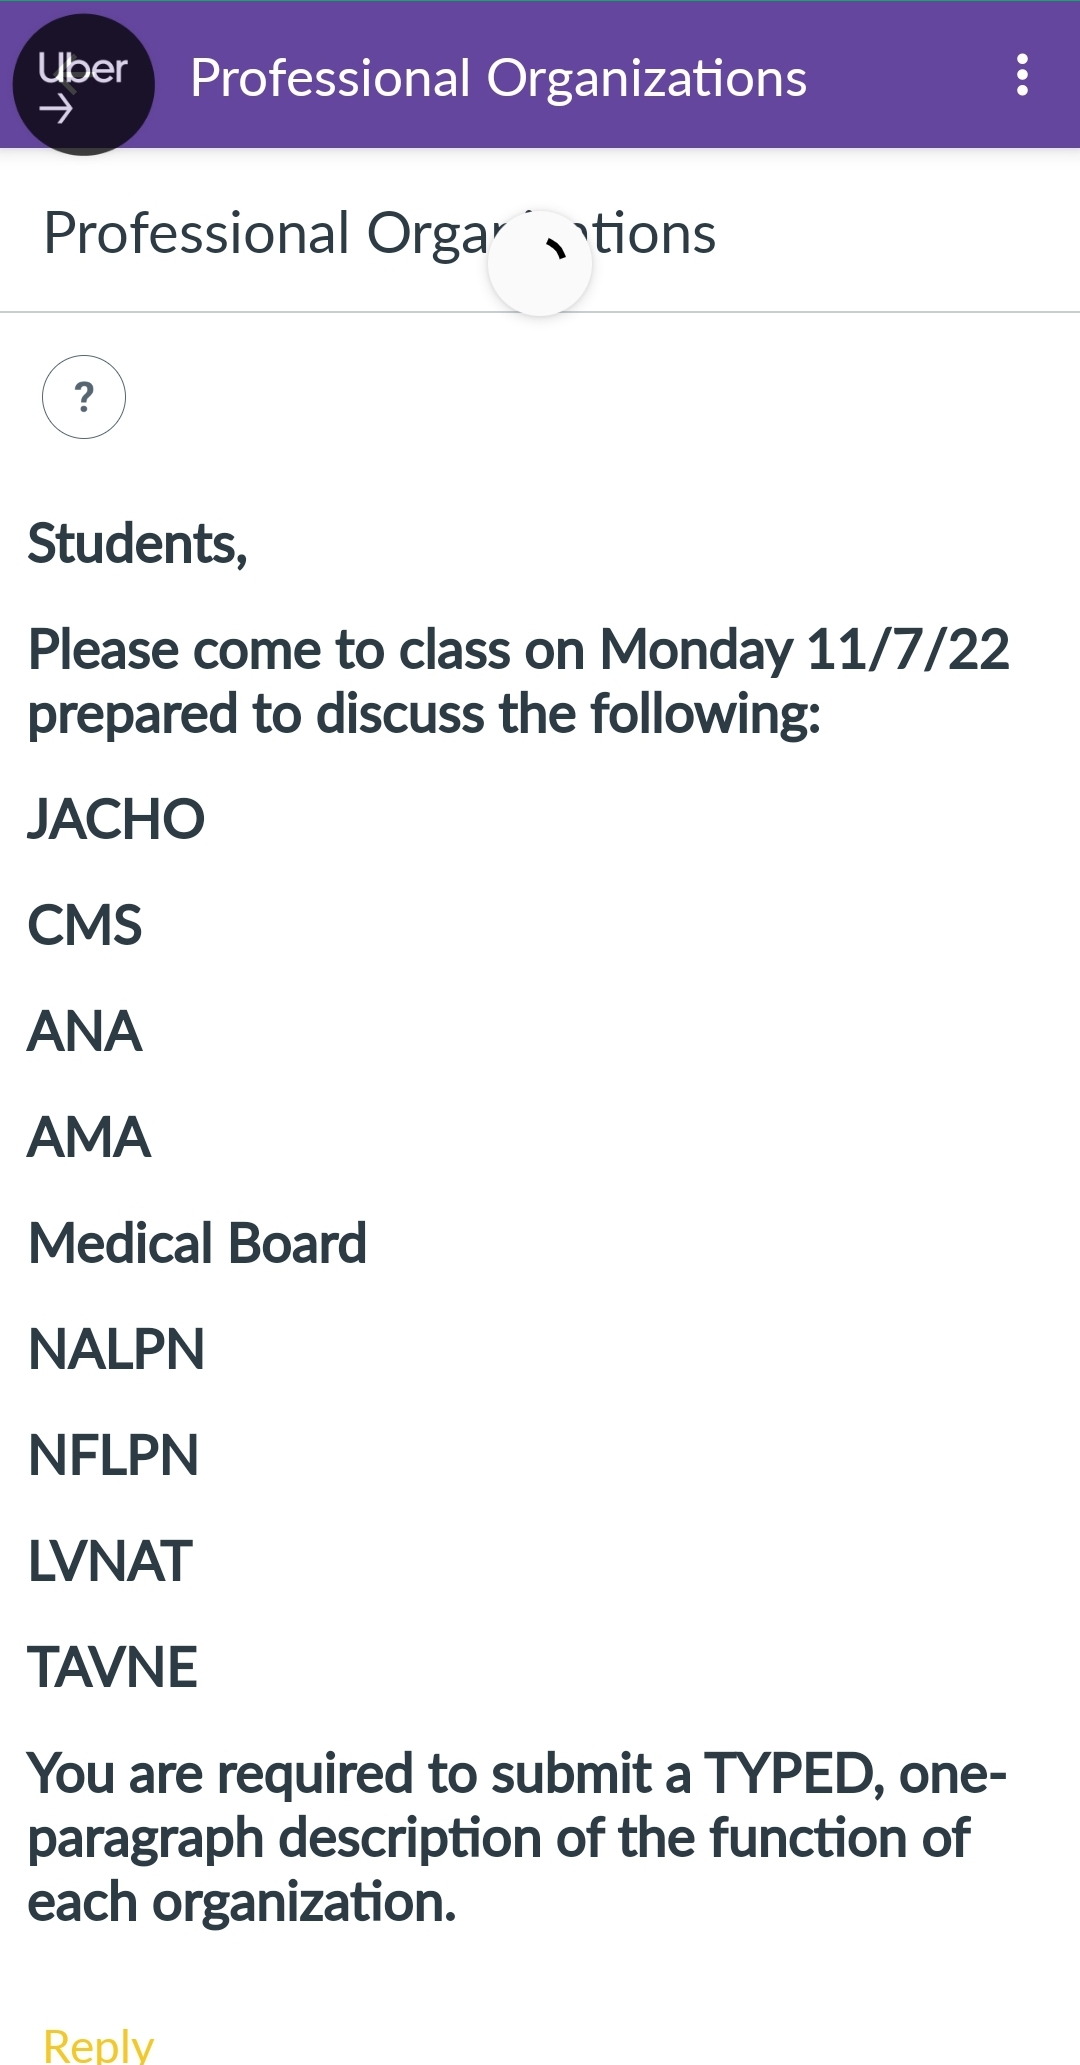 Uber Professional Organizations
Professional Orgations
?
Students,
Please come to class on Monday 11/7/22
prepared to discuss the following:
JACHO
CMS
ΑΝΑ
AMA
Medical Board
NALPN
NFLPN
LVNAT
TAVNE
You are required to submit a TYPED, one-
paragraph description of the function of
each organization.
Reply